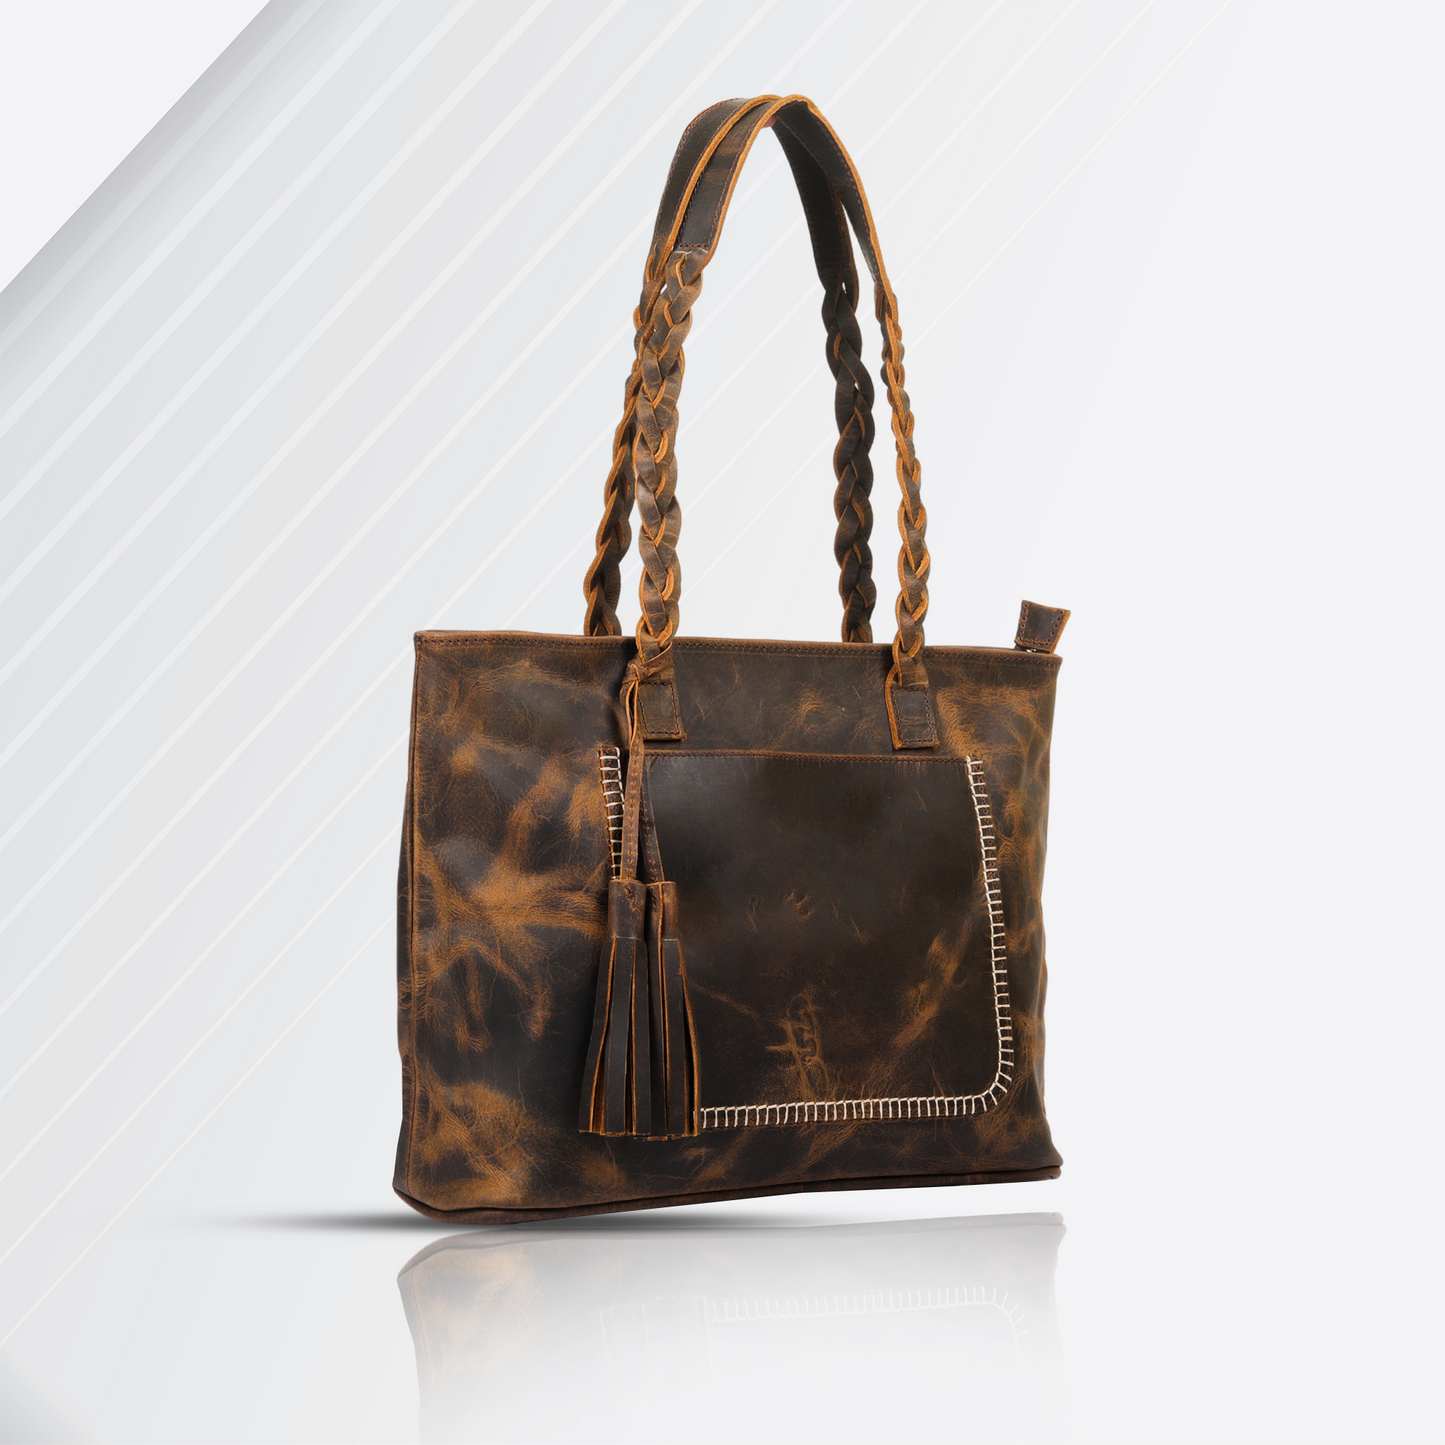 Fashion Meets Comfort: Durable Handles in Our Leather Tote Bag